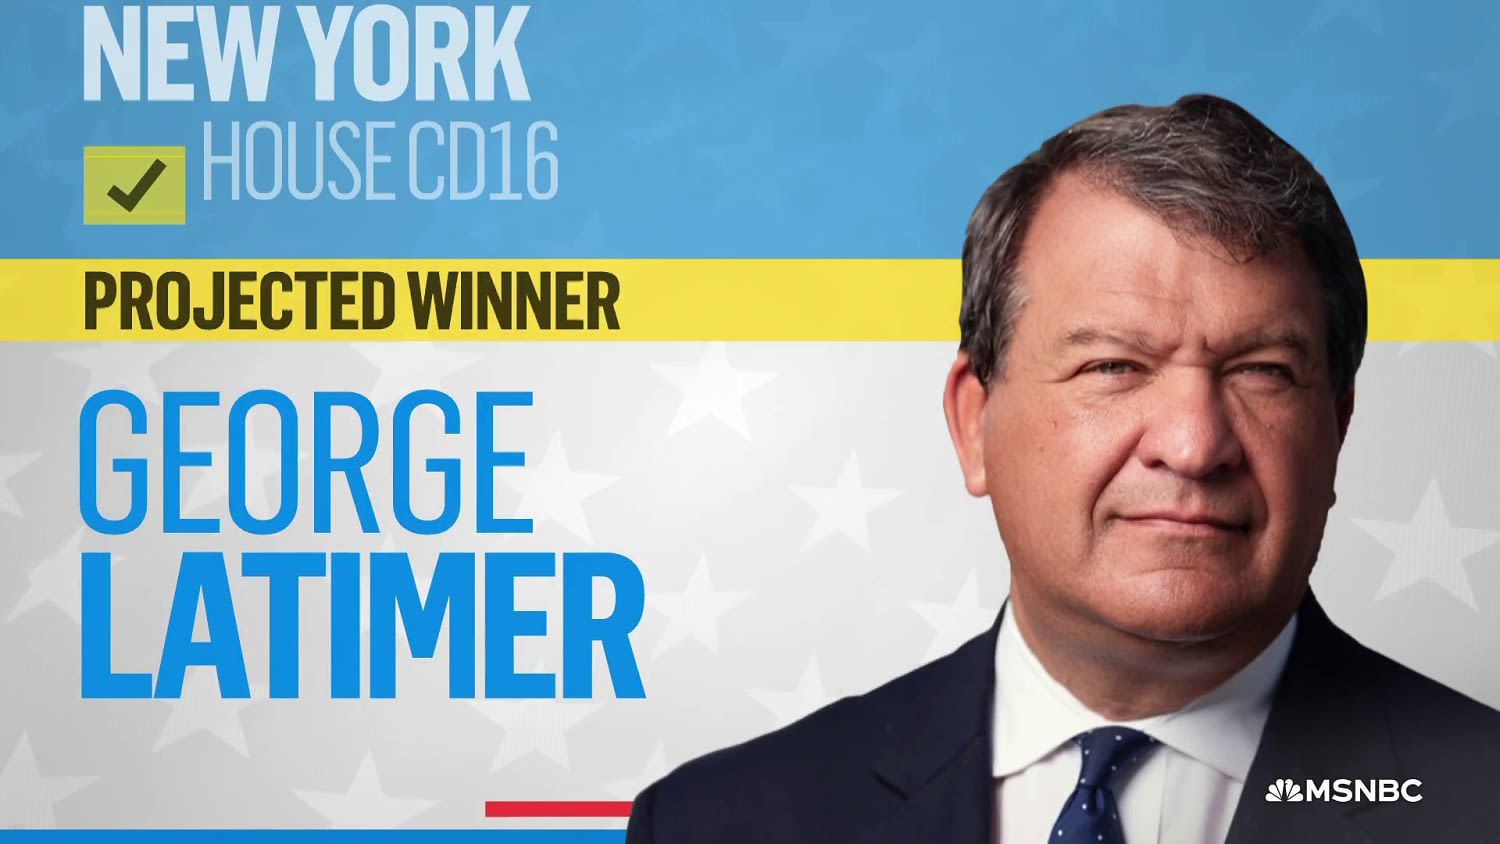 Latimer defeats Bowman in closely watched NY Democratic primary, NBC News projects